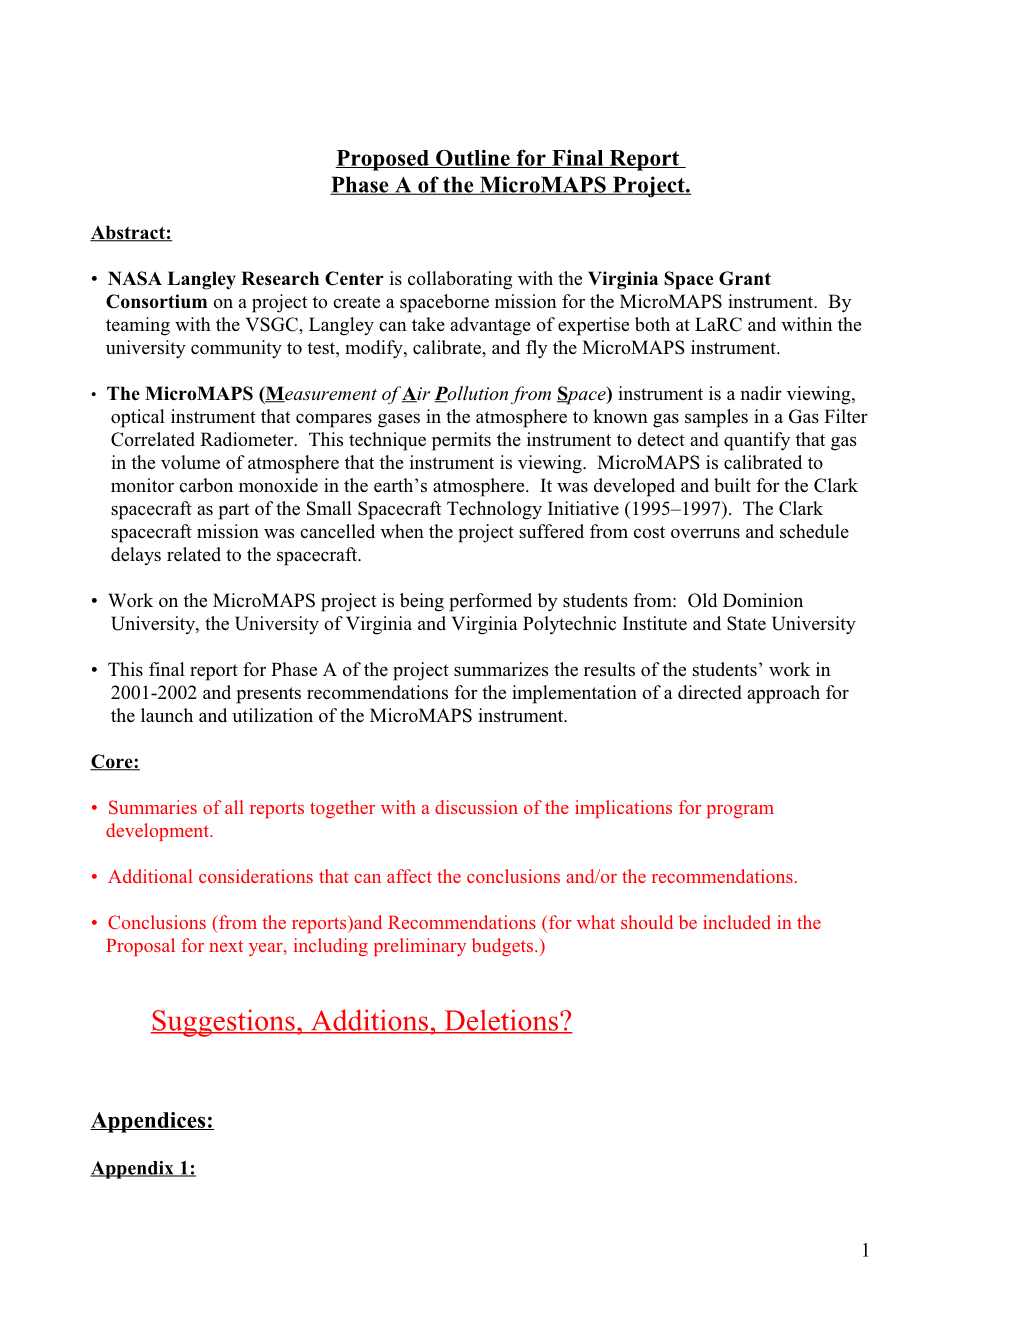 Outline for Final Report on Phase a of the Micromaps Project